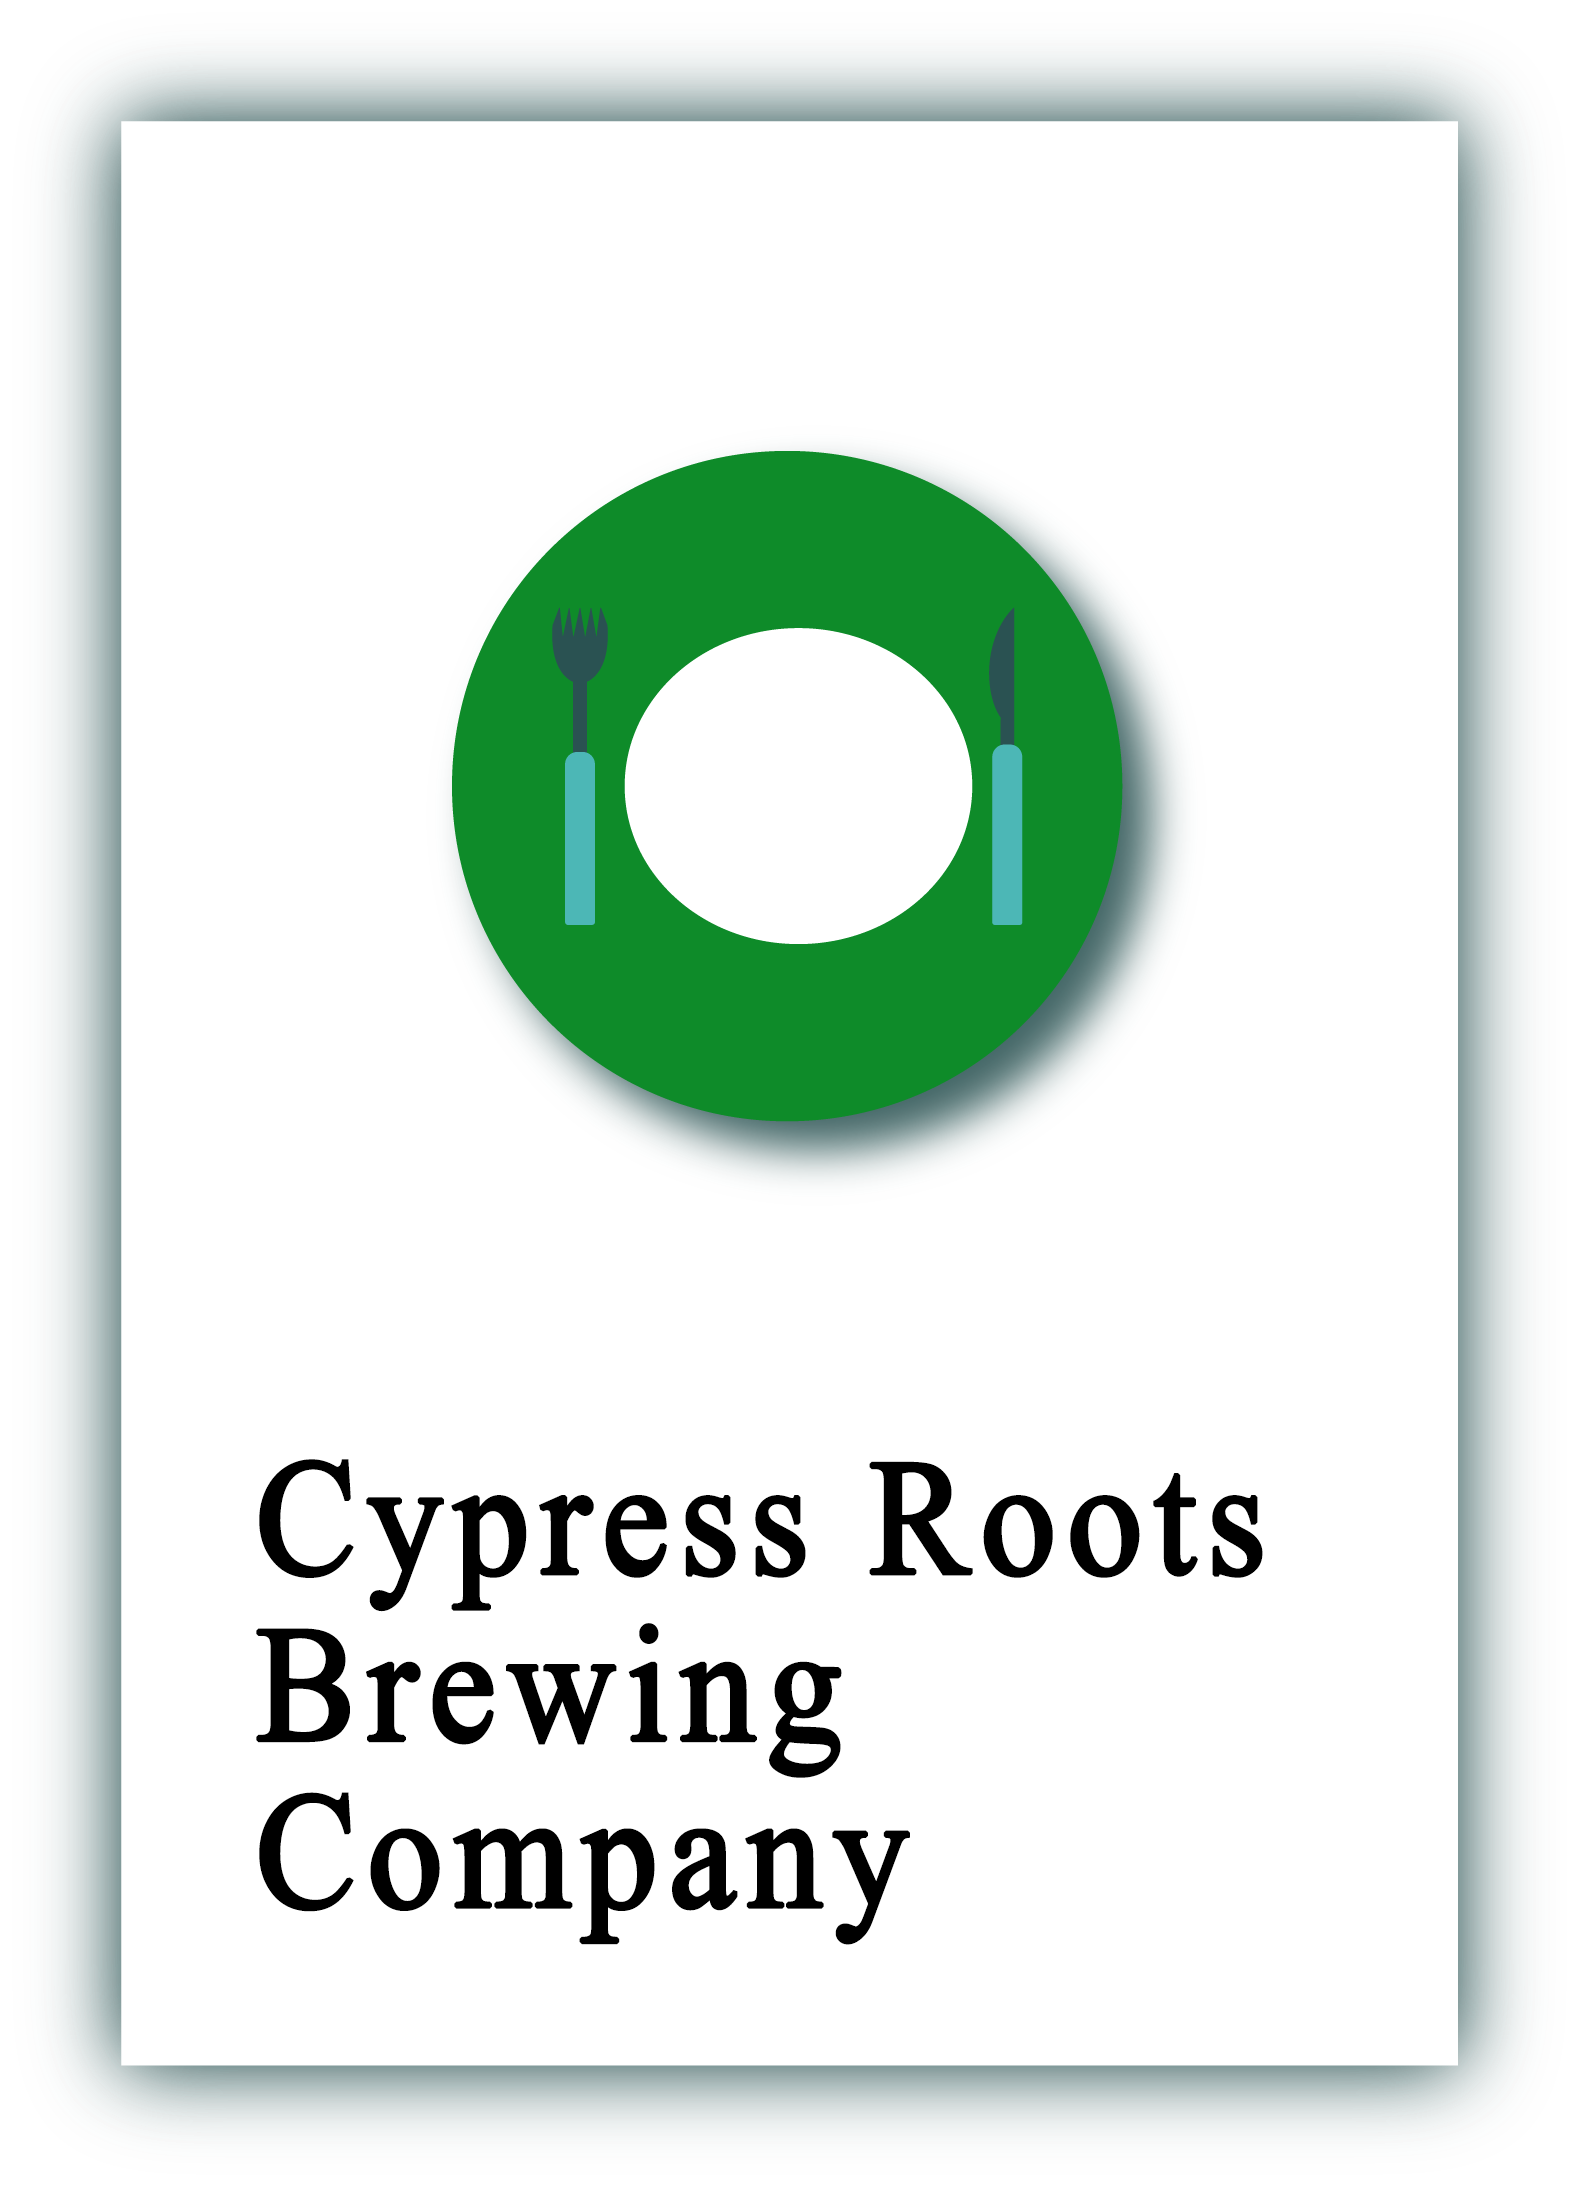 Cypress Roots Brewiing Company